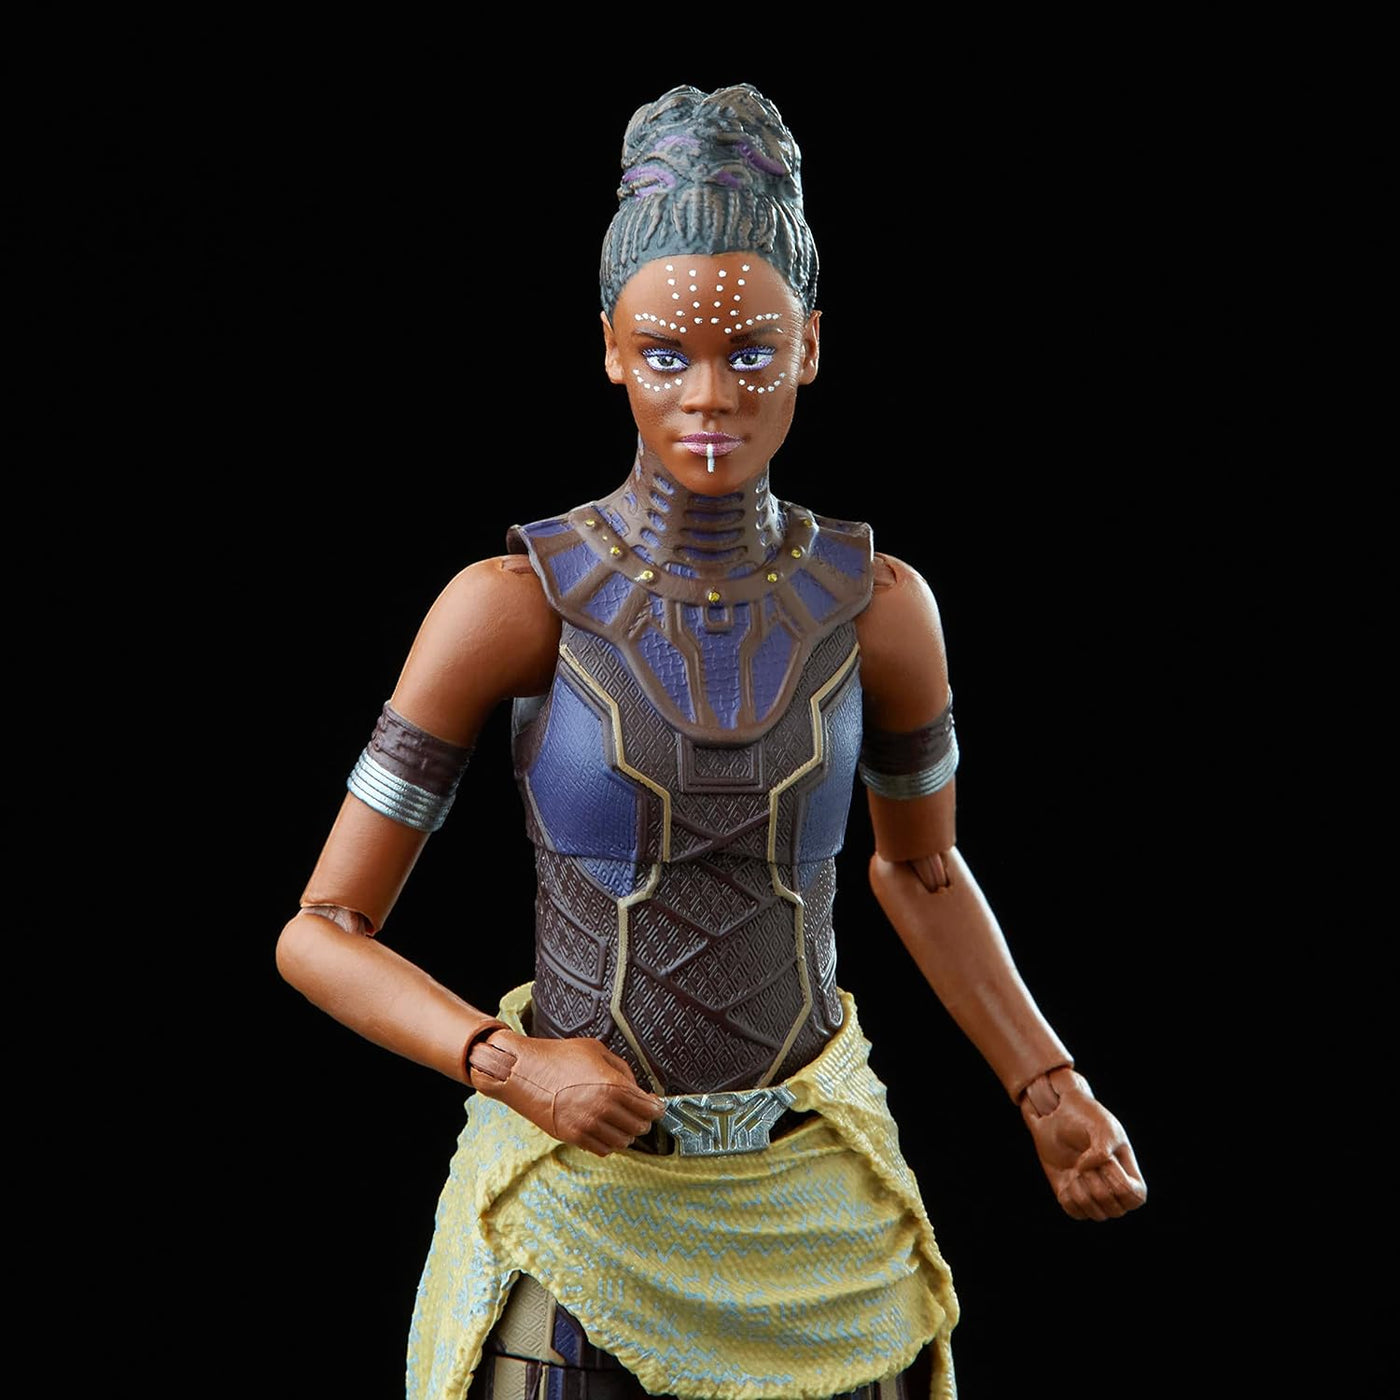 Marvel Legends Series Black Panther Legacy Collection Shuri 6-inch Action Figure Collectible Toy, 2 Accessories